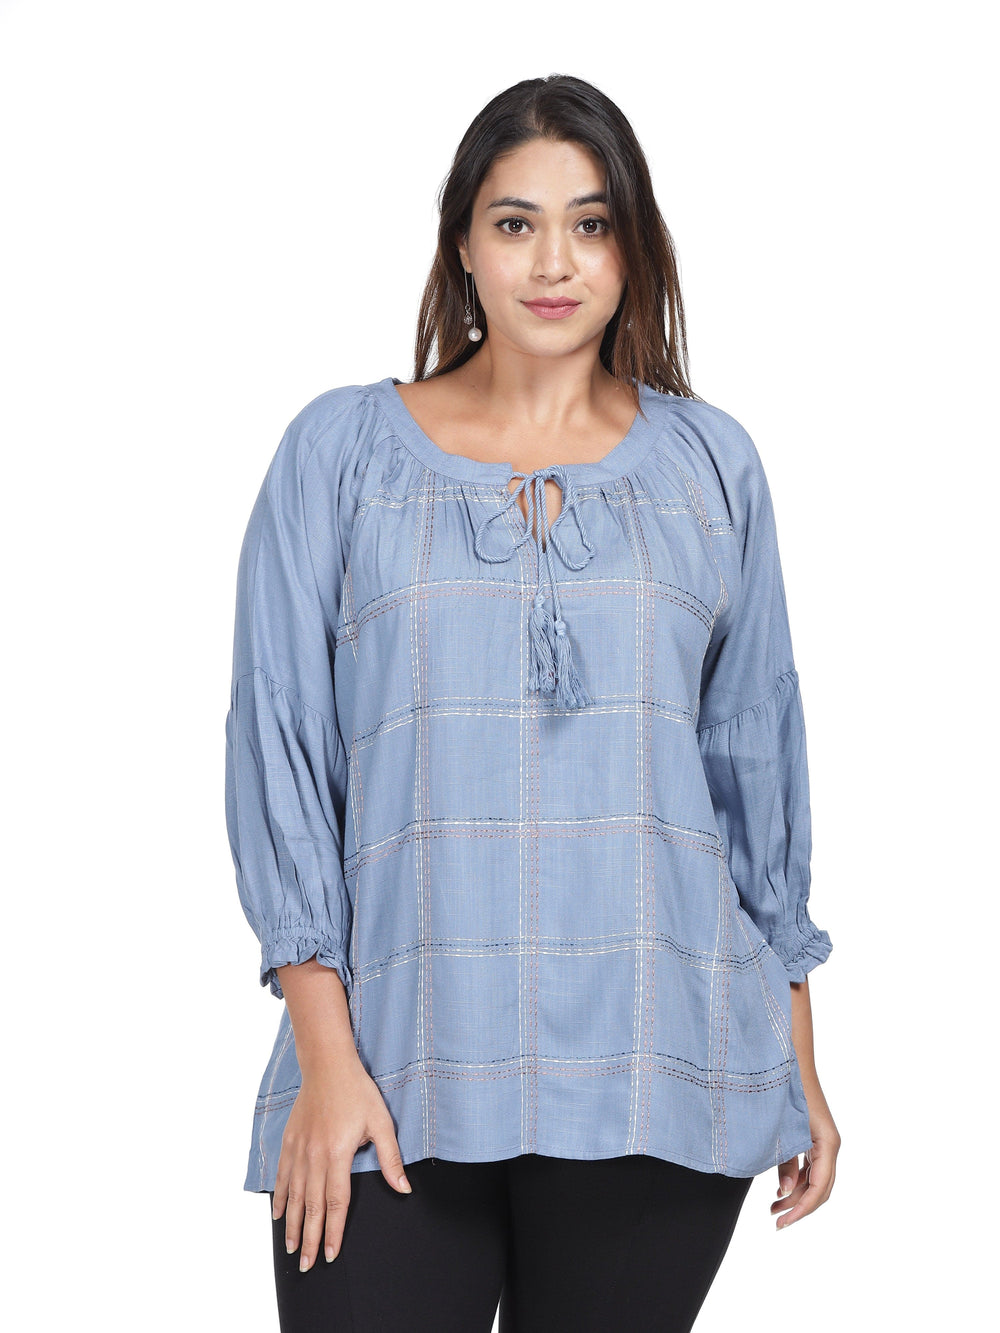  Casual Tops  Rayon Tops For Ladies - Buy Blue Rayon Top Online In India- 9shines label 